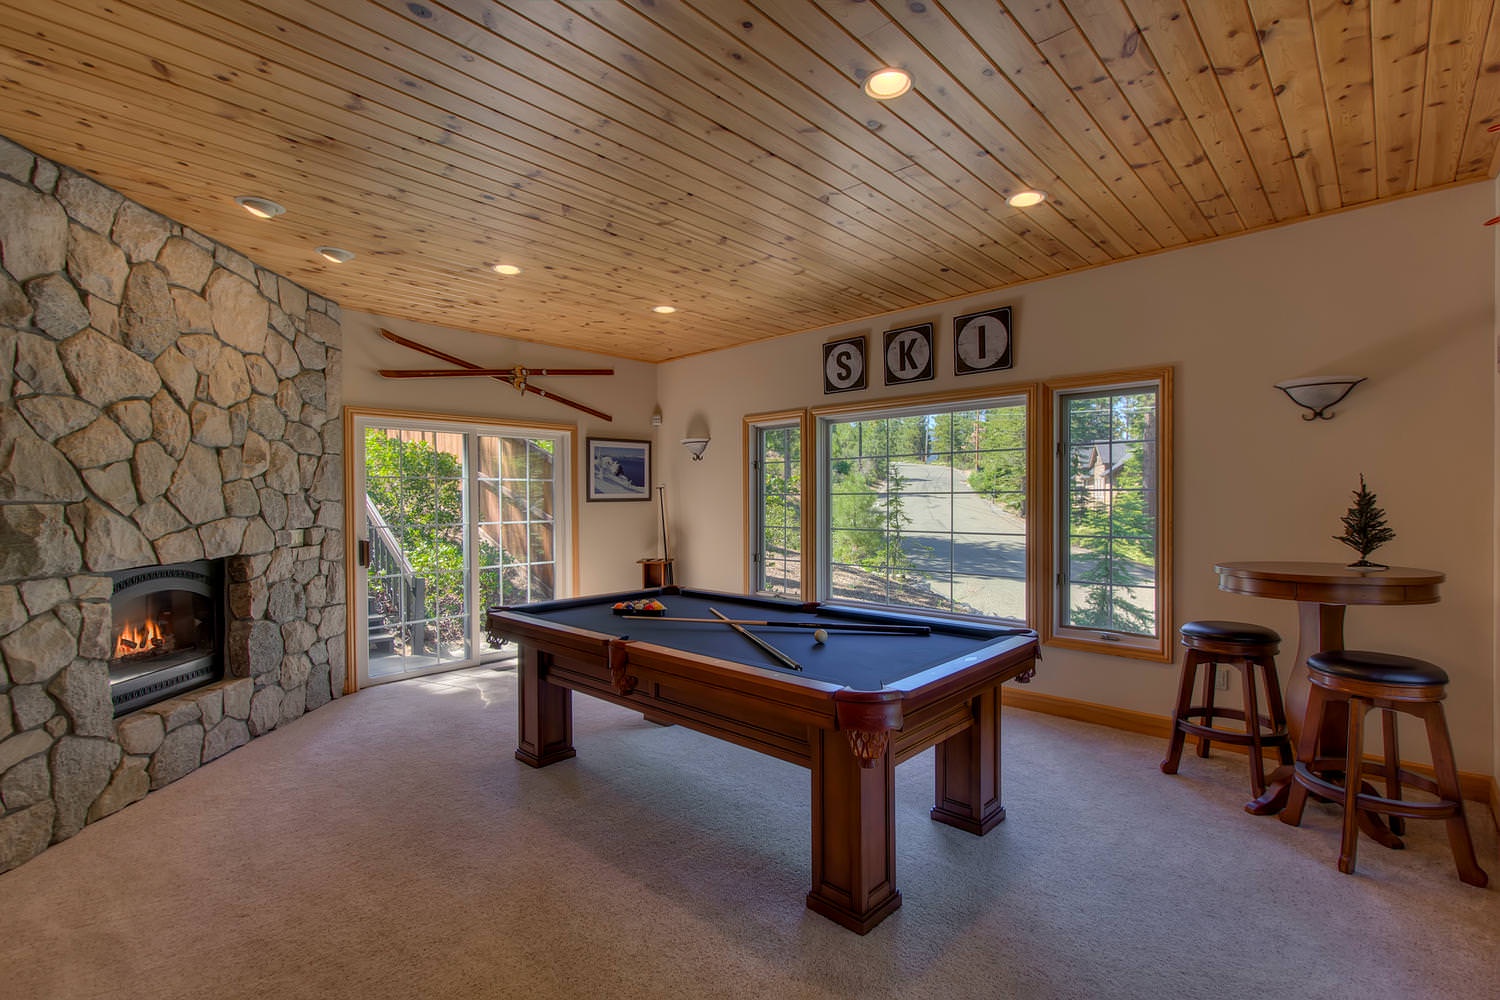 Downstairs game room with pool table